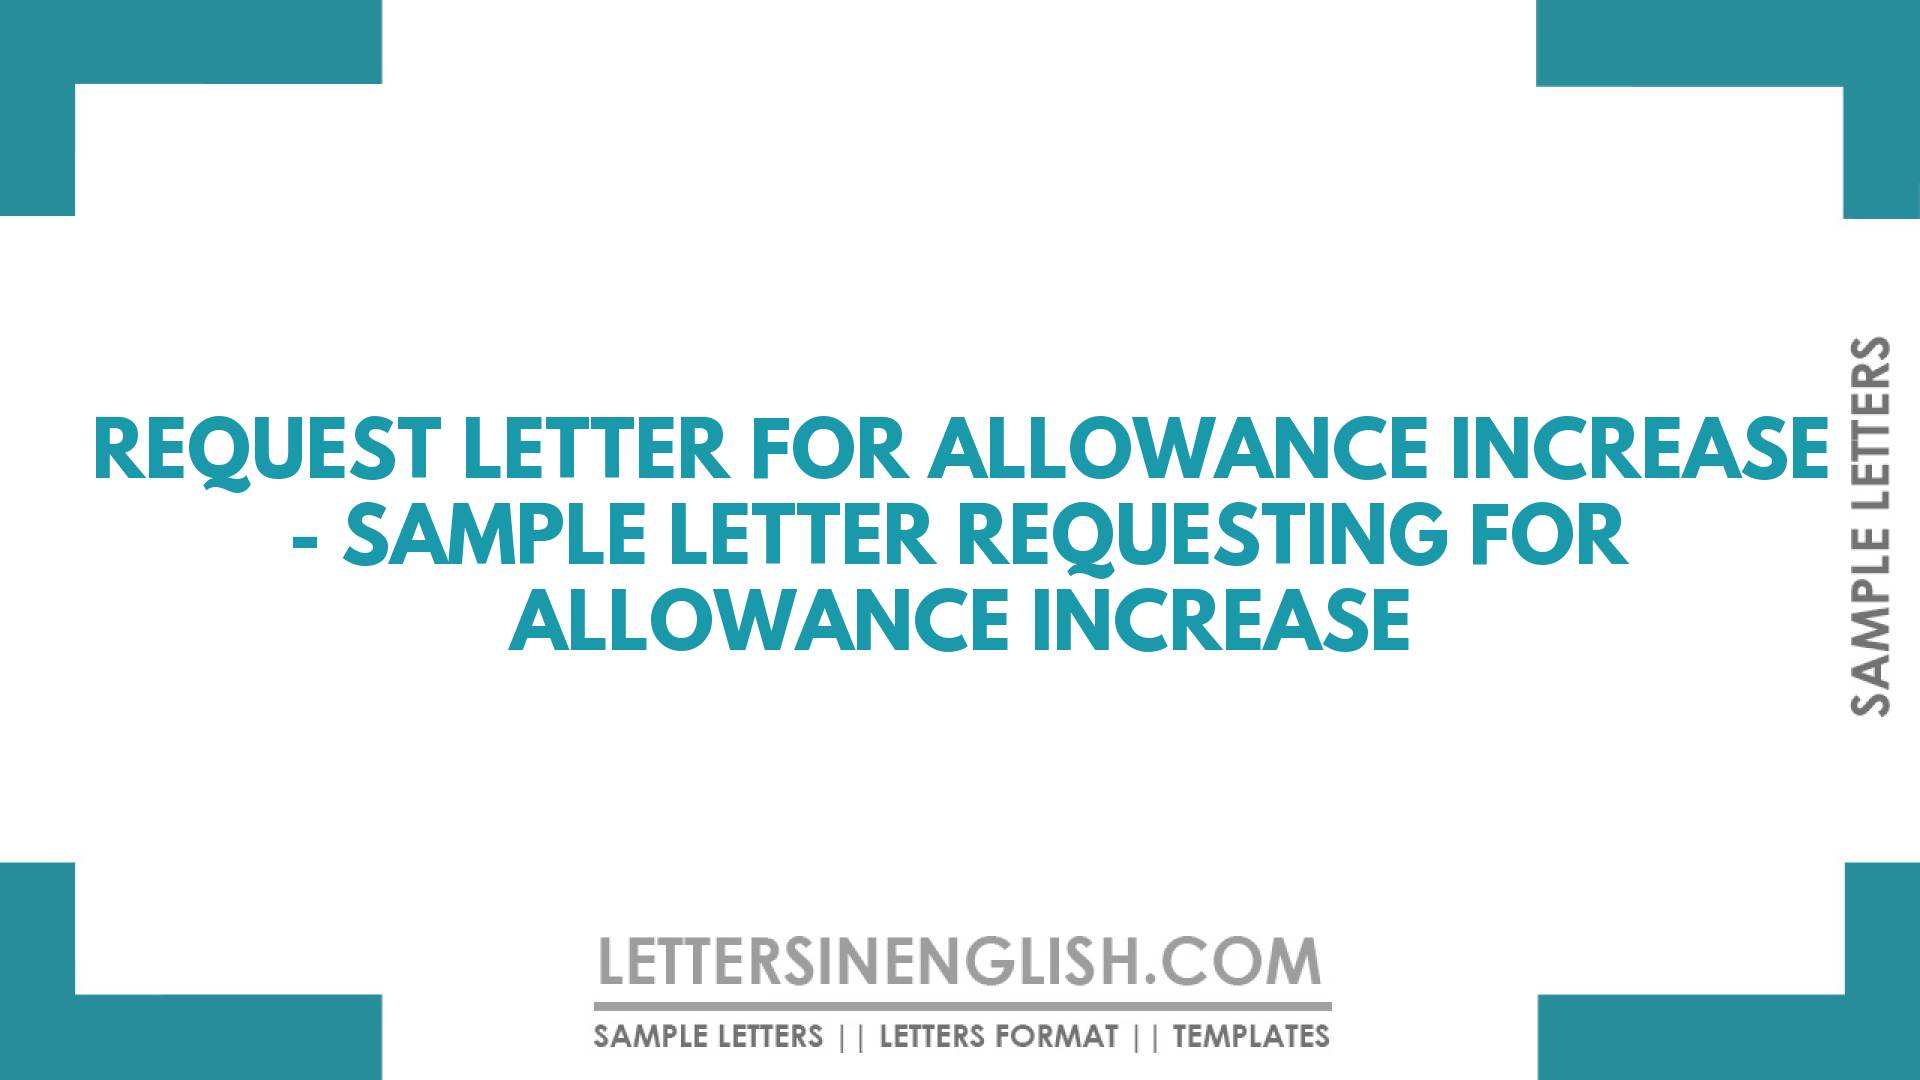 Request Letter for Allowance Increase – Sample Letter Requesting for Allowance Increase